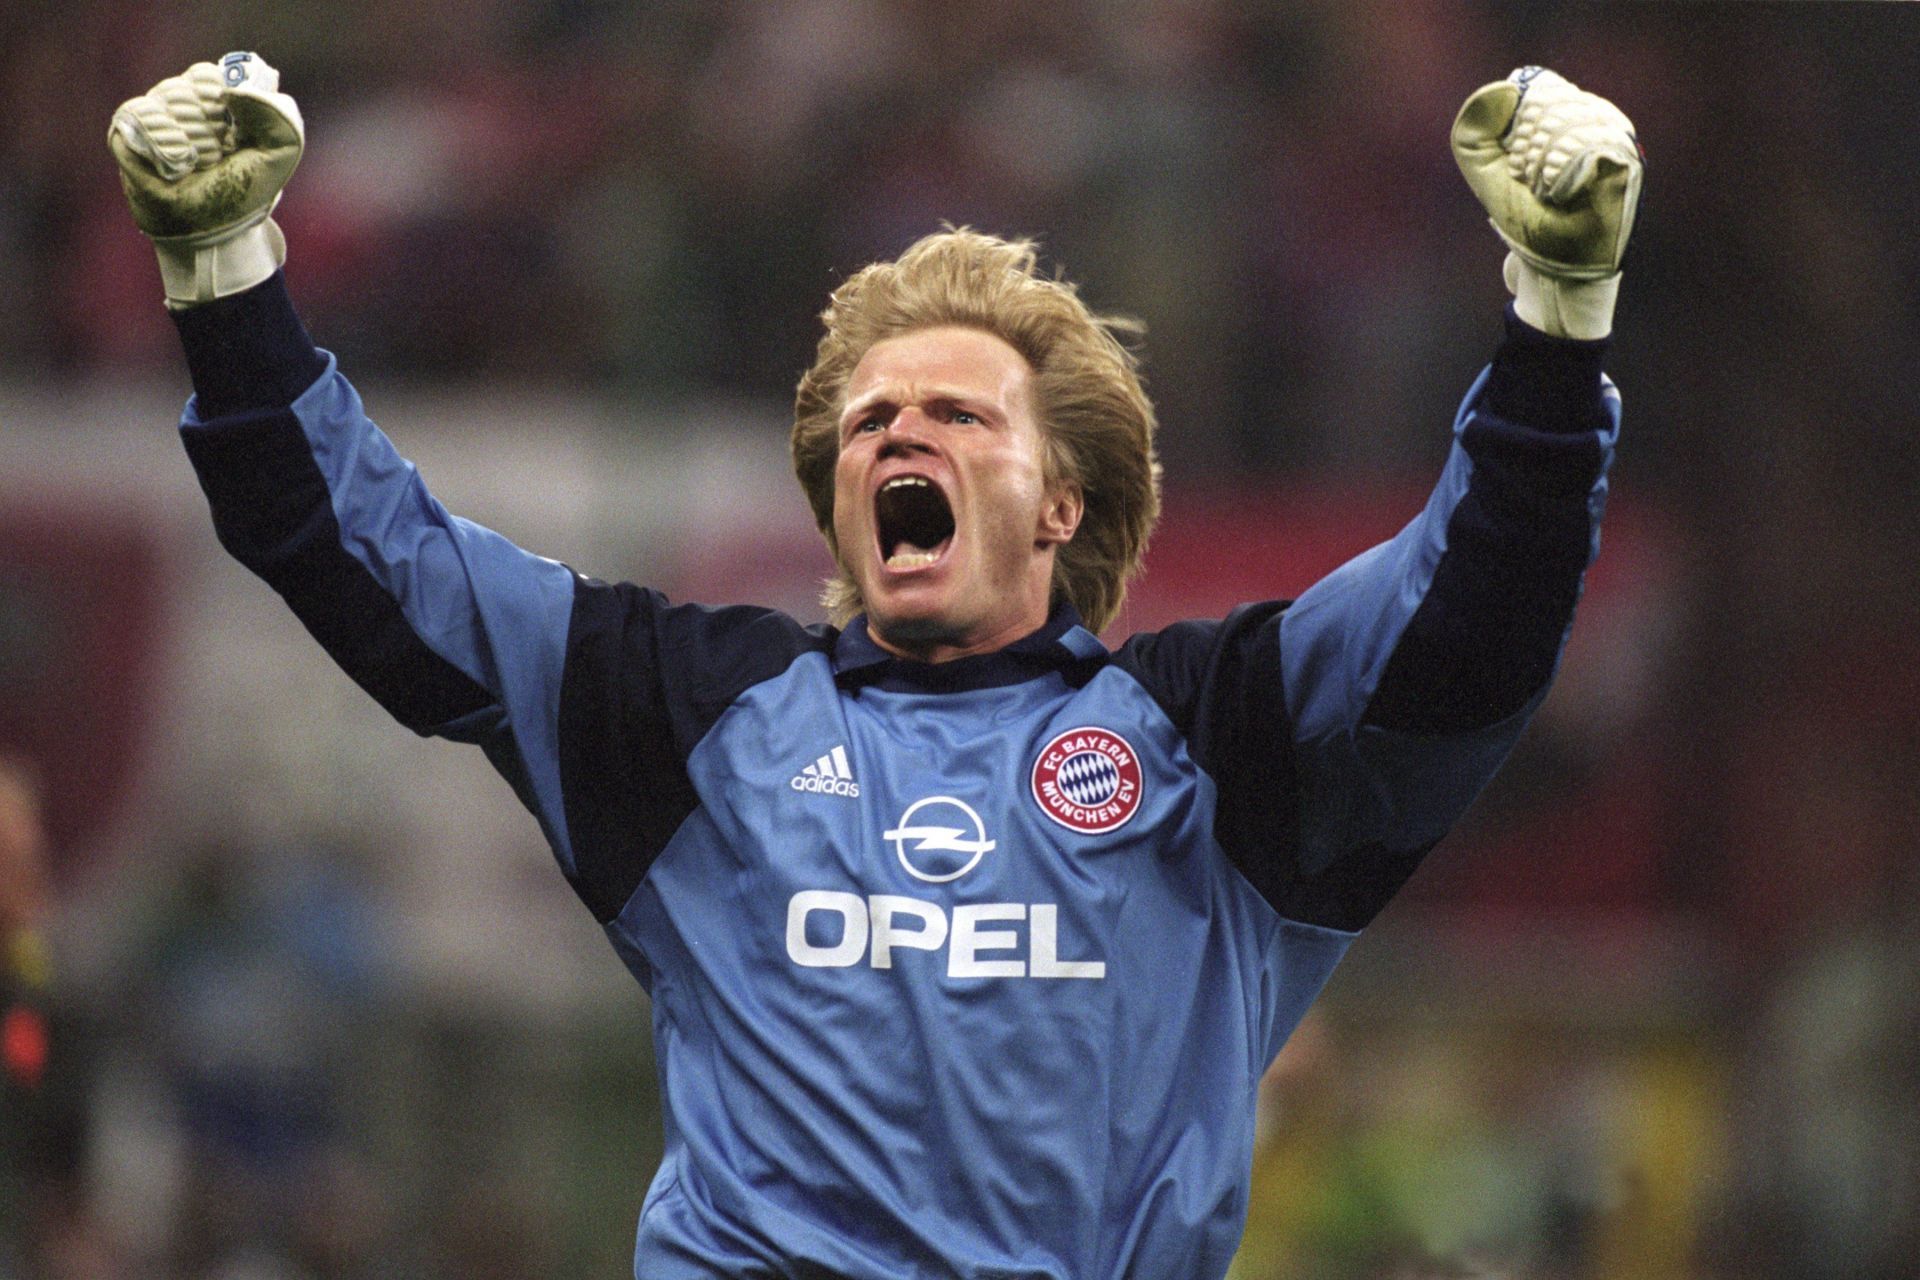 Oliver Kahn is regarded as one of the best keepers in the history of the game